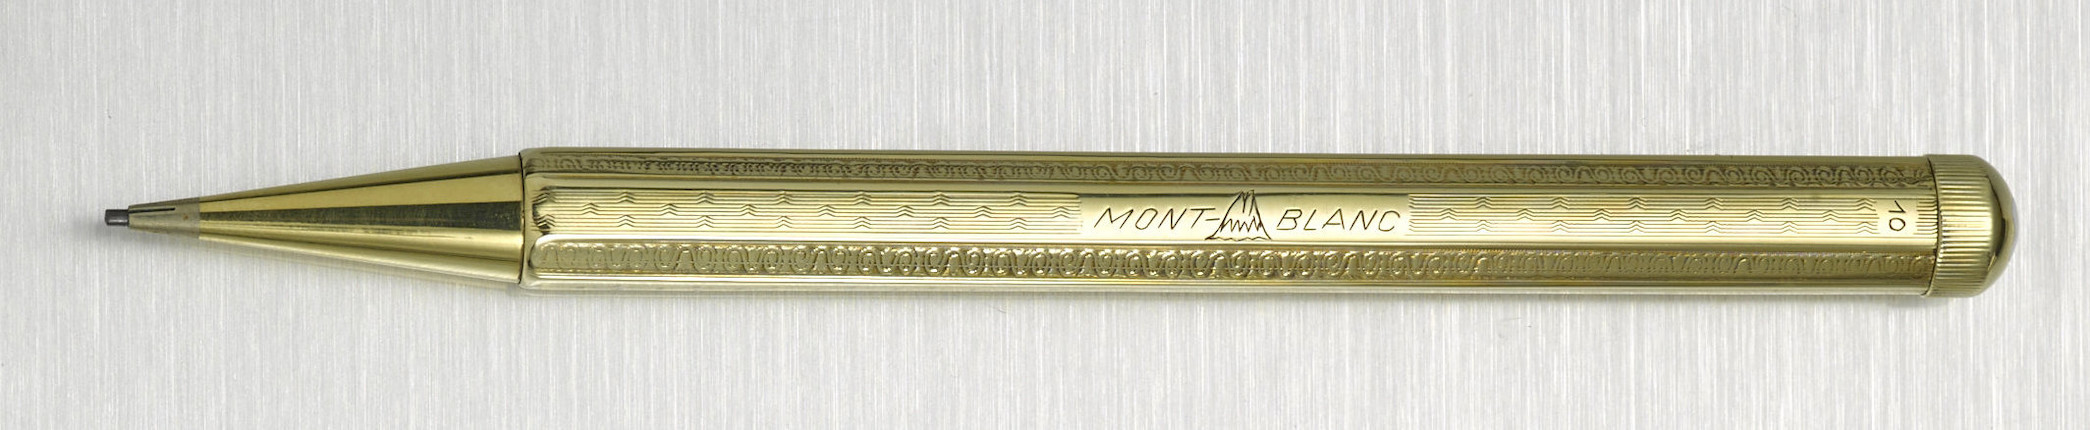 MONTBLANC Rare No. 10 Octogonal 14K Solid Gold Propelling Pencil, c.1926 image 1